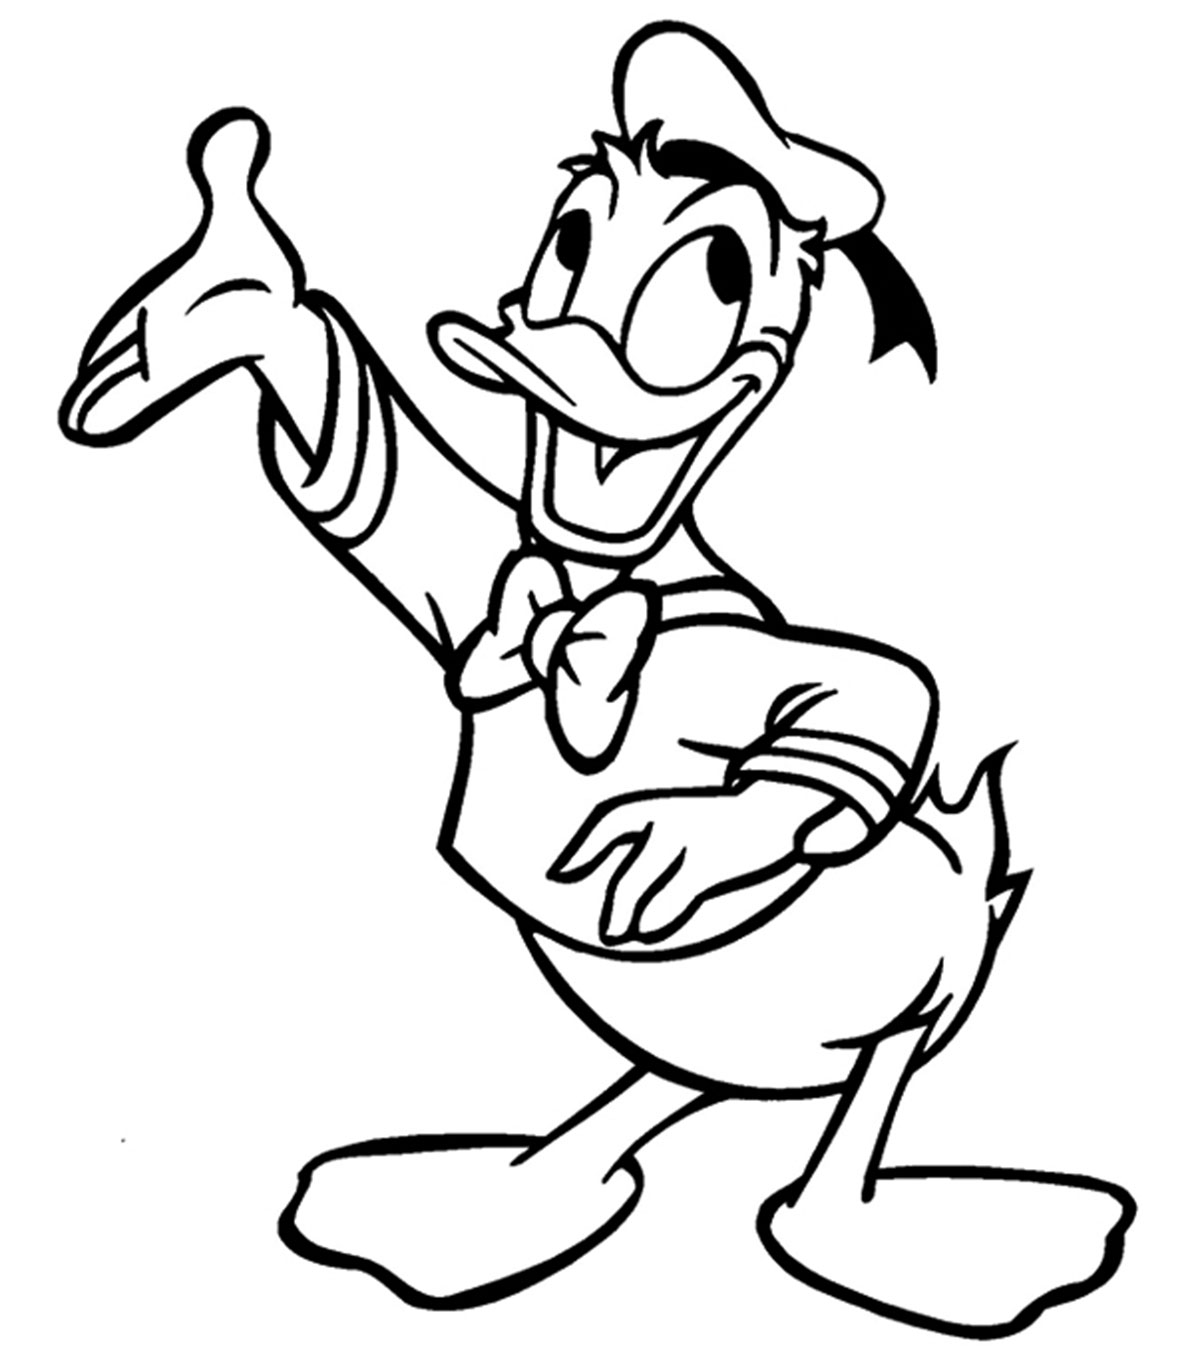 25 Cute Donald Duck Coloring Pages Your Toddler Will Love_image